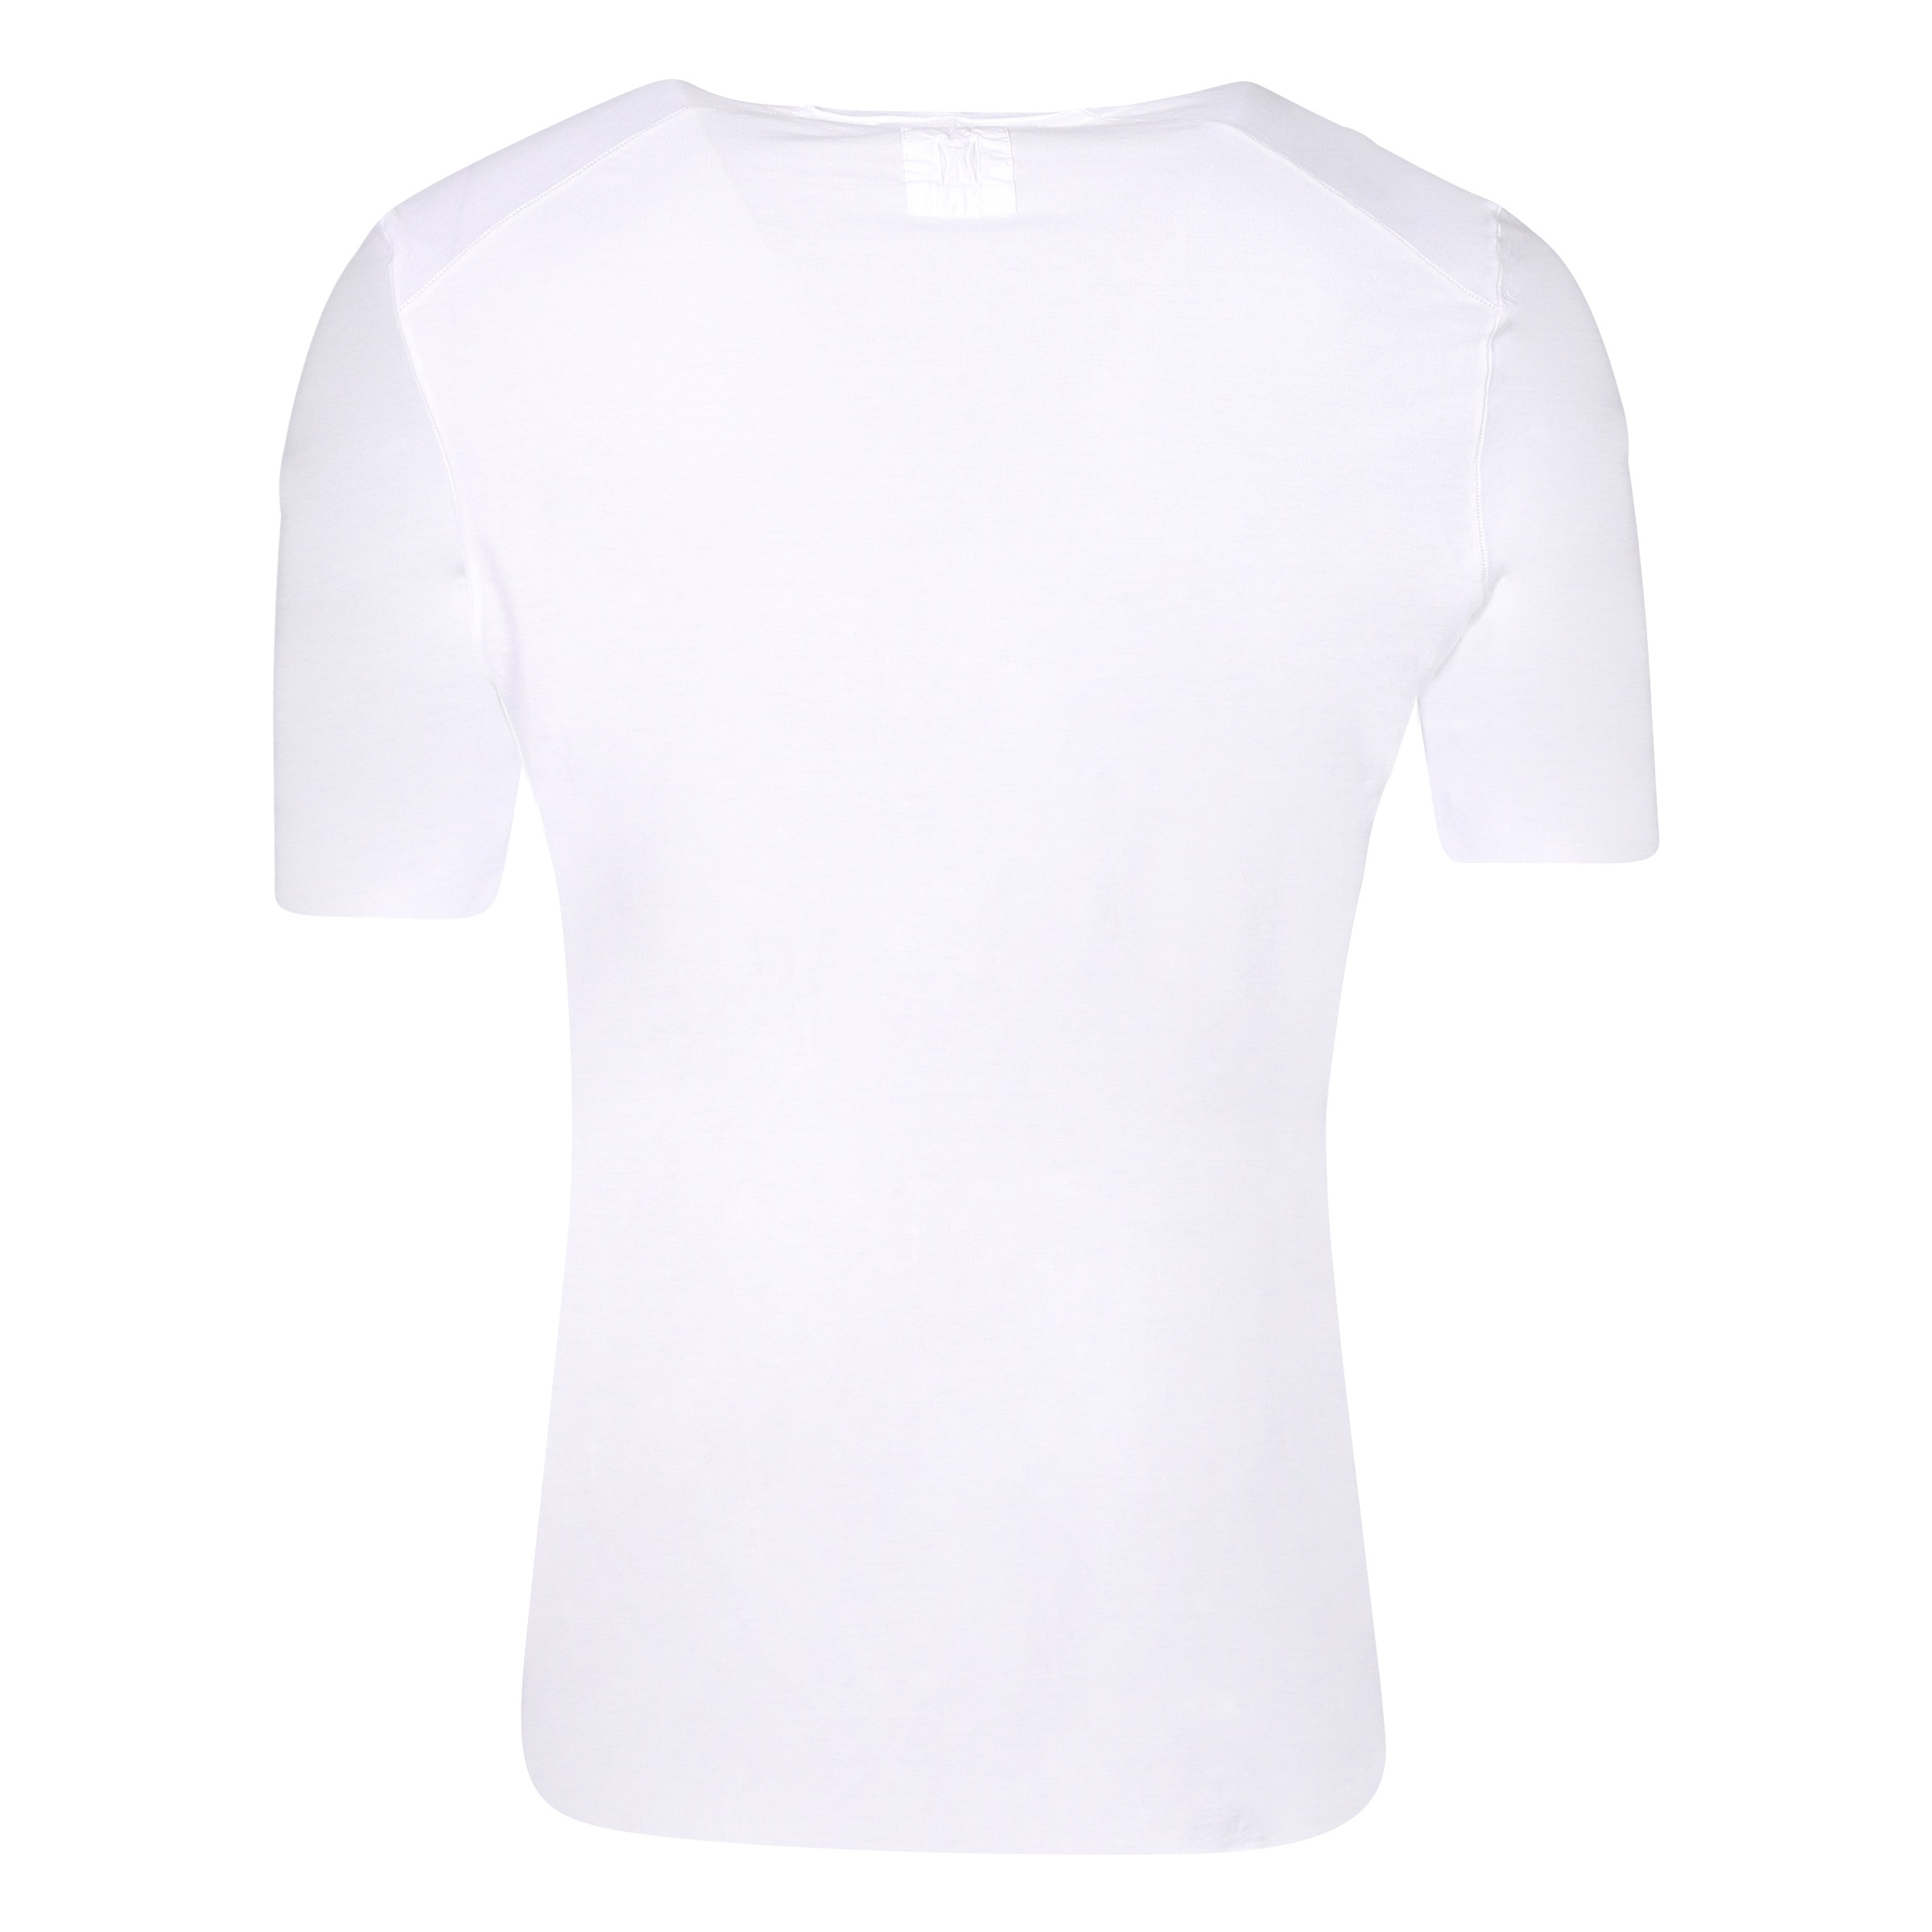 Hannes Roether V-Neck T-Shirt in White M